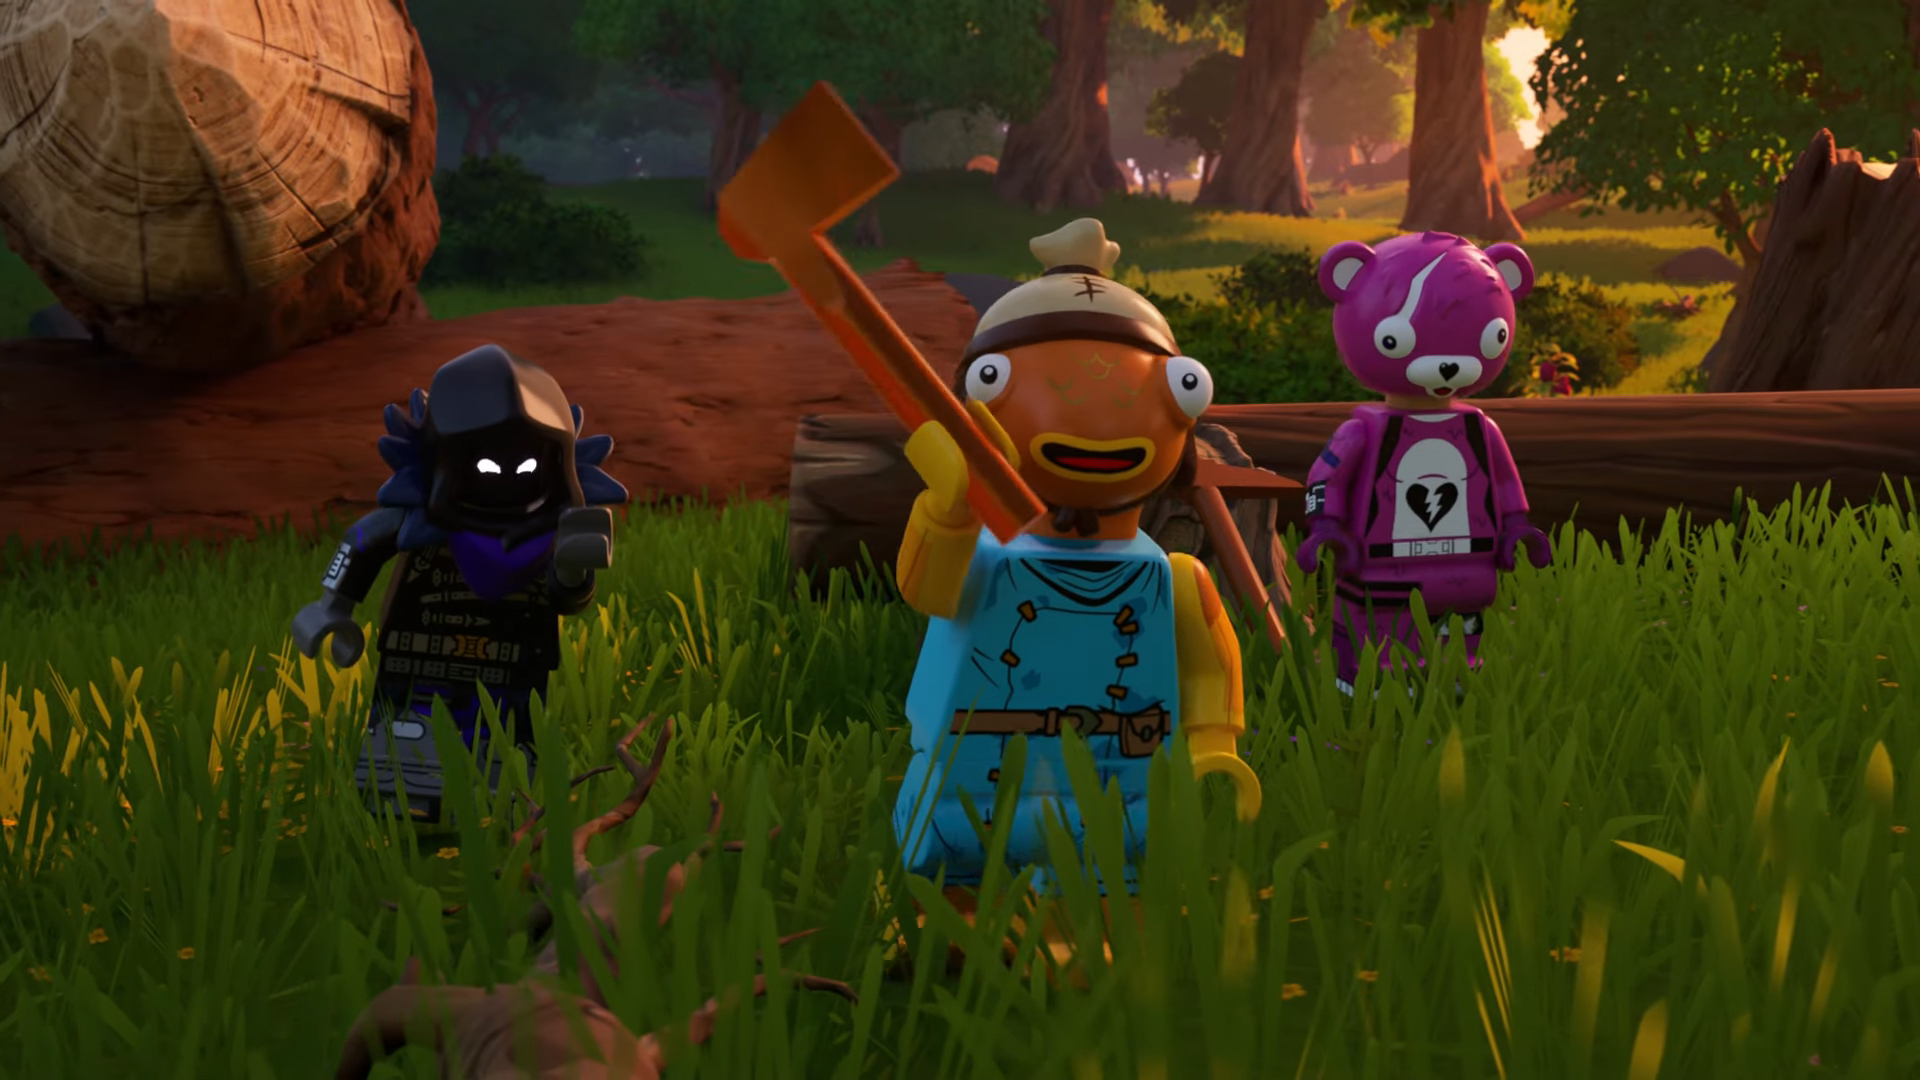 For a cute and cheery little survival game, Lego Fortnite goes